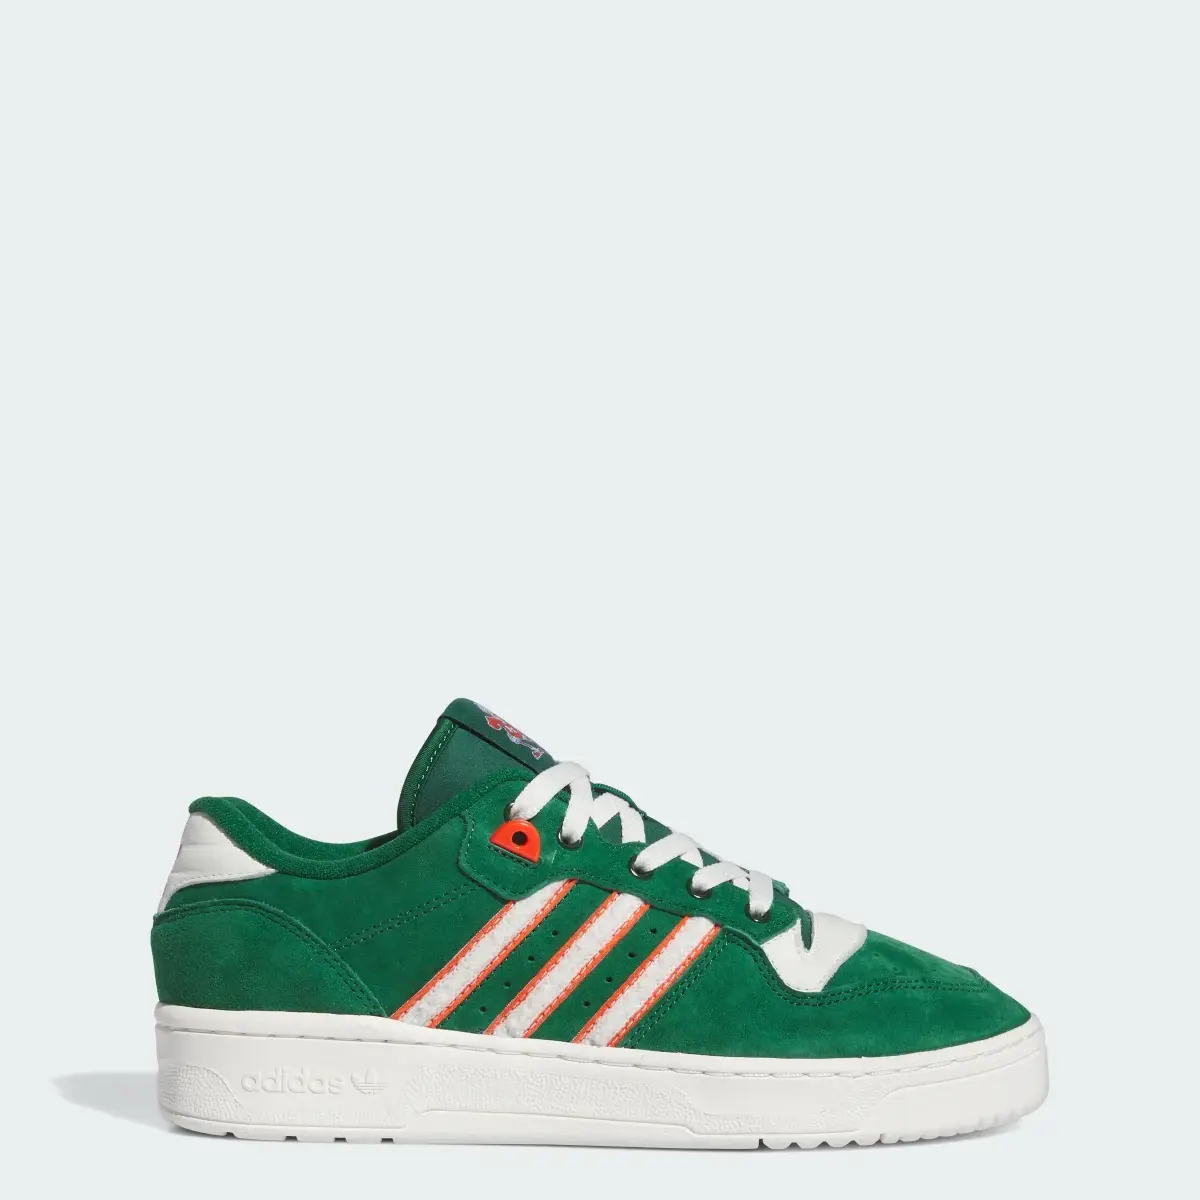 Adidas Miami Rivalry Low Shoes. 1